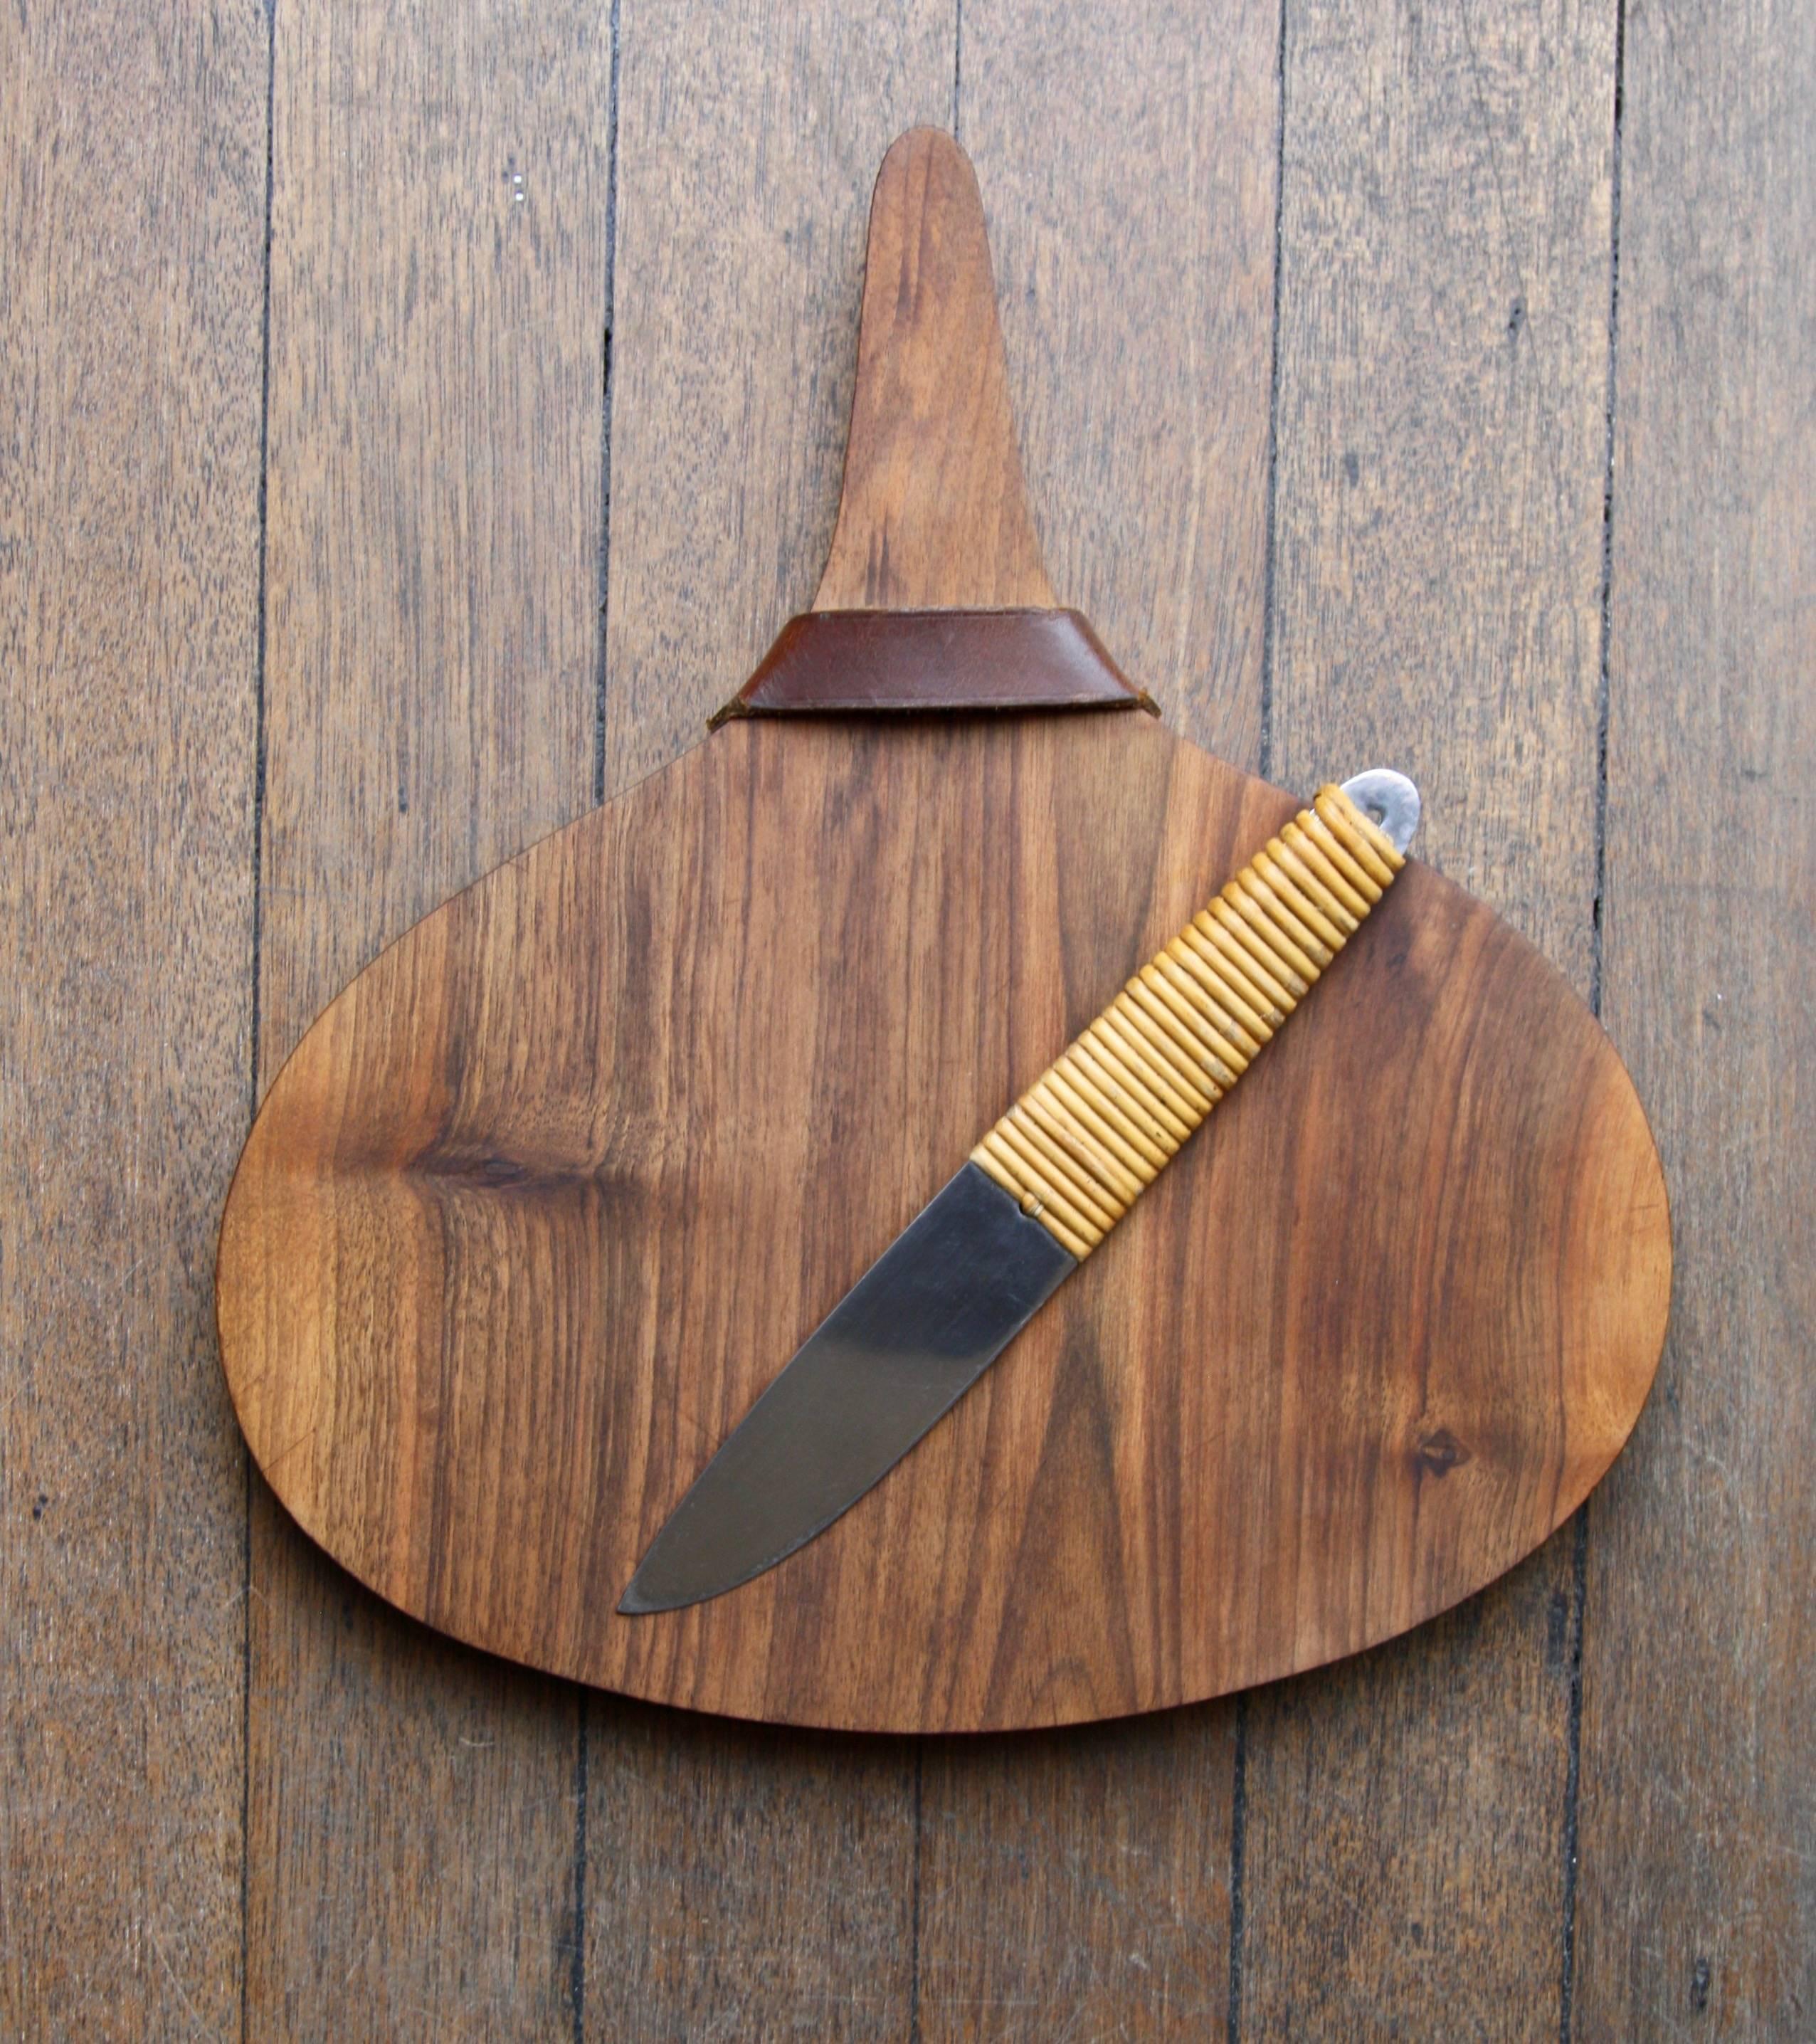 Carl Auböck II Walnut Cutting and Handled Serving Board with Knife 2